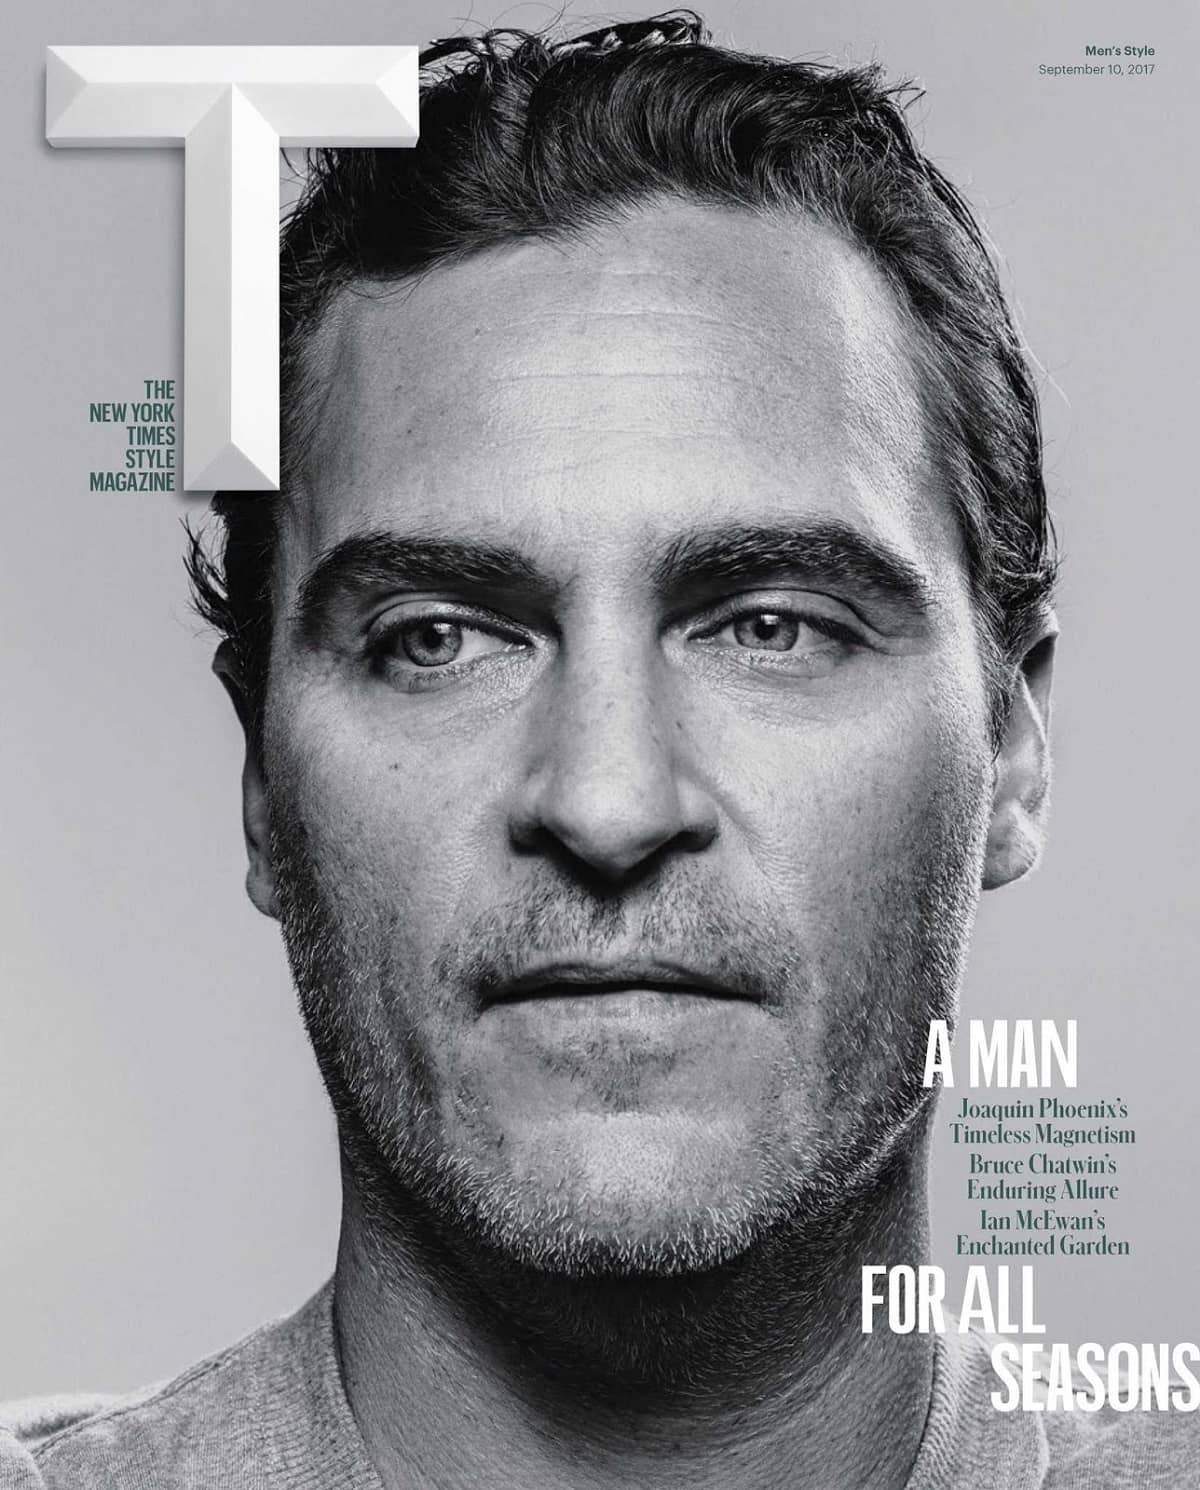 Joaquin Phoenix Covers The New York Times Style Magazine September 2017 - Men's Style Issue